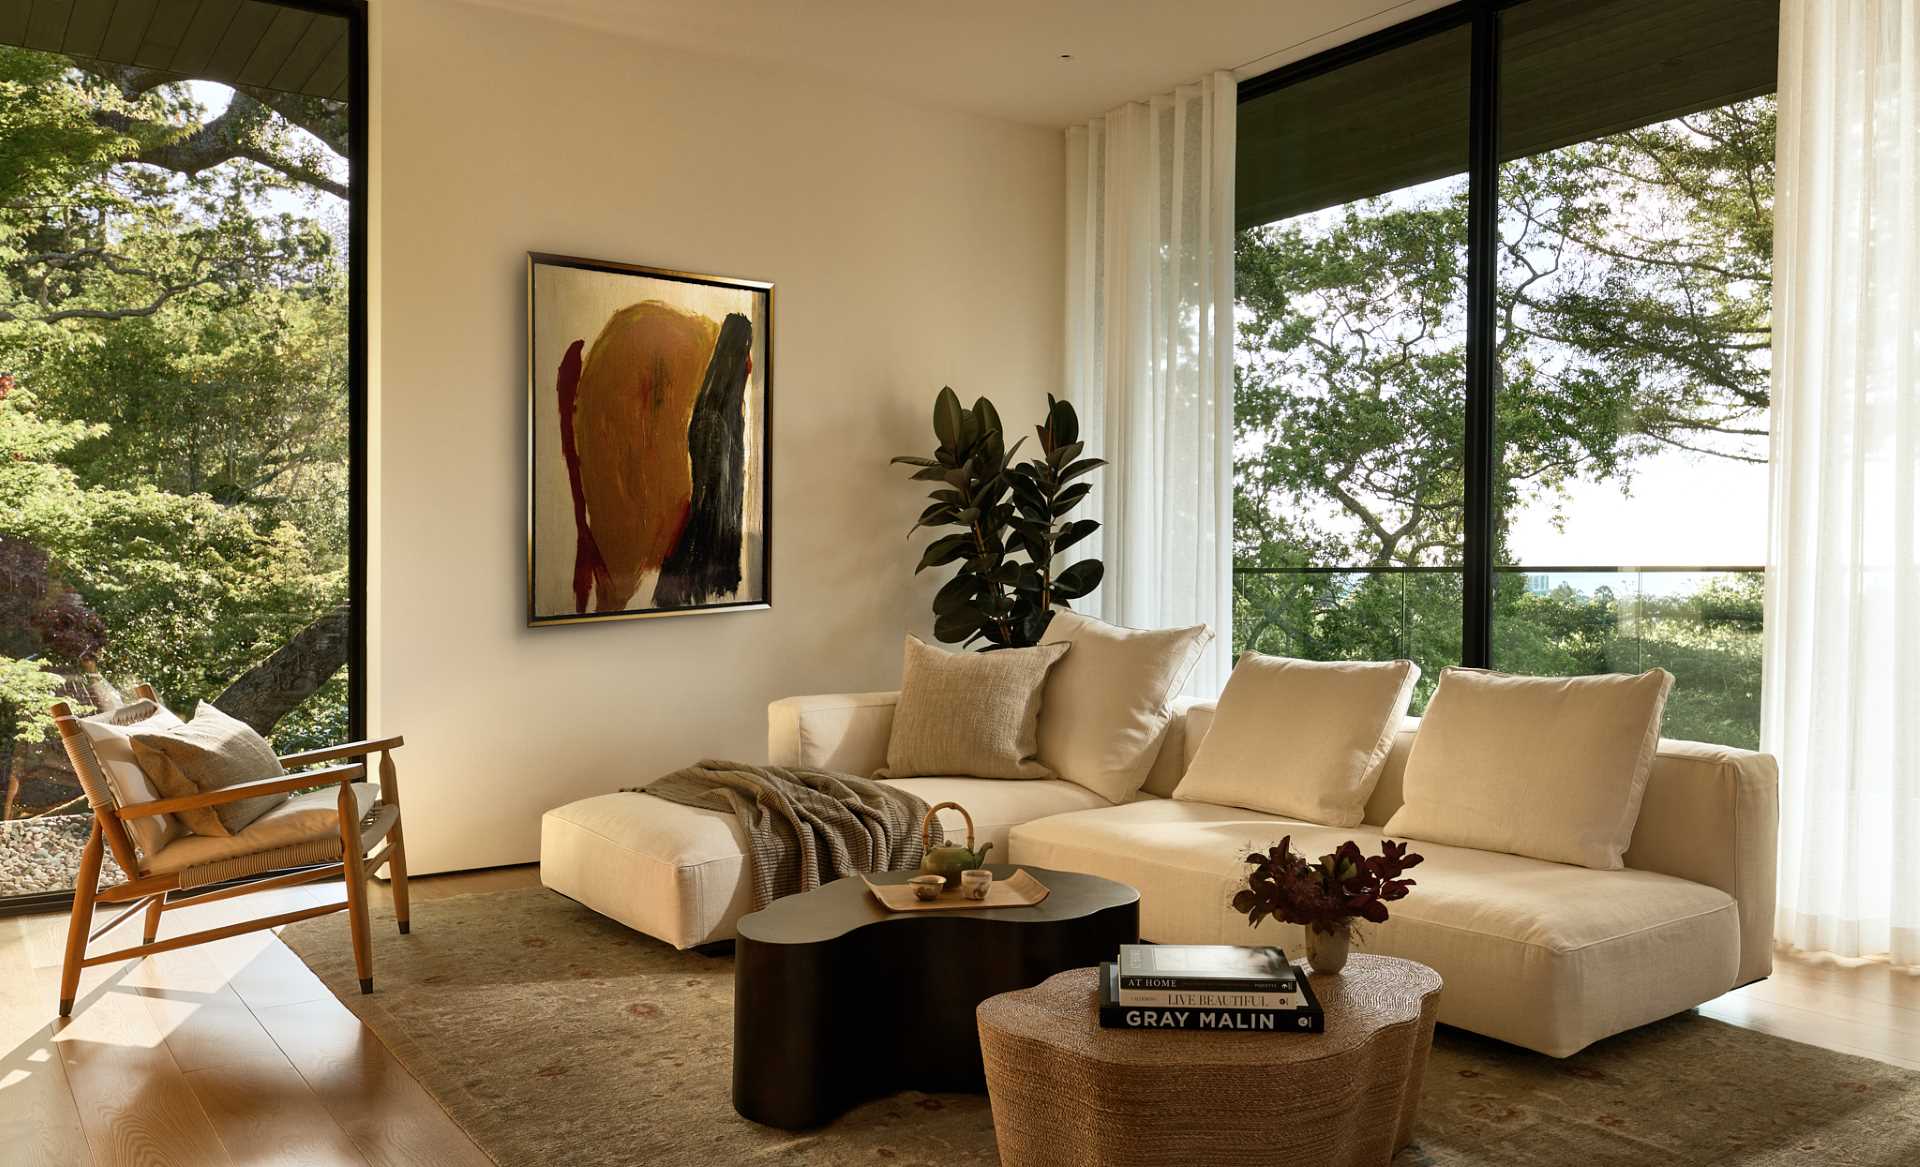 A living room with a cozy atmosphere and views of the trees.